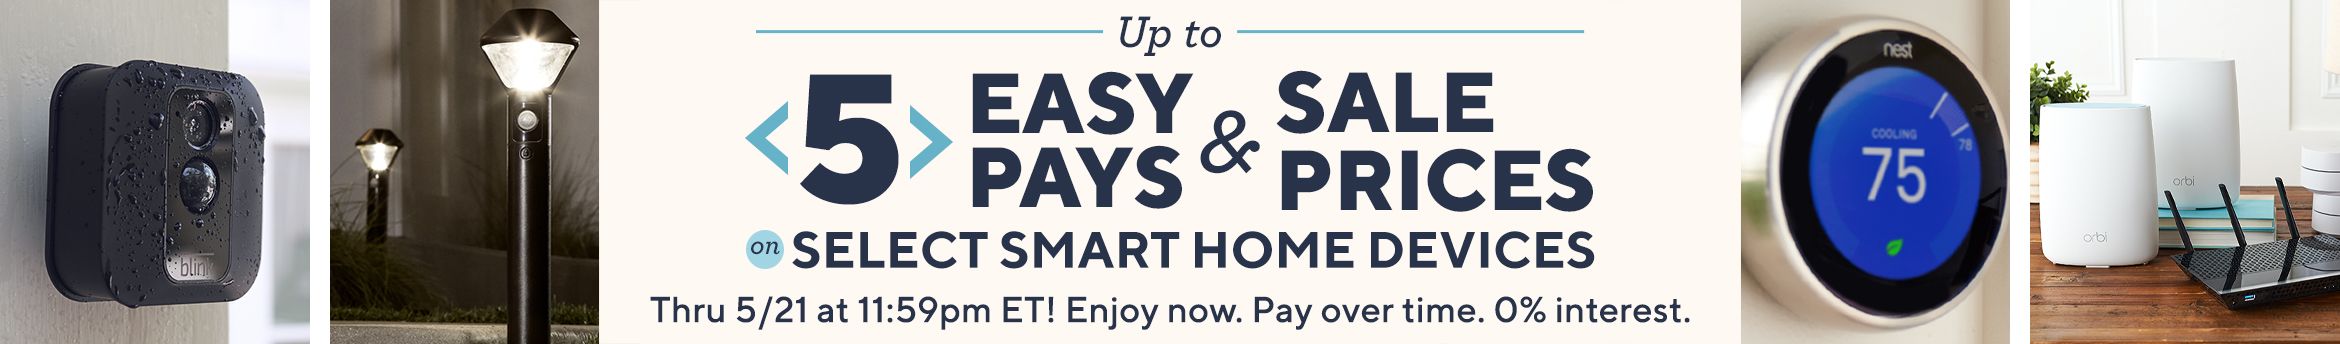 Up to 5 Easy Pays & Sale Prices on Select Smart Home Devices Thru 5/21 at 11:59pm ET! Enjoy now. Pay over time. 0% interest.